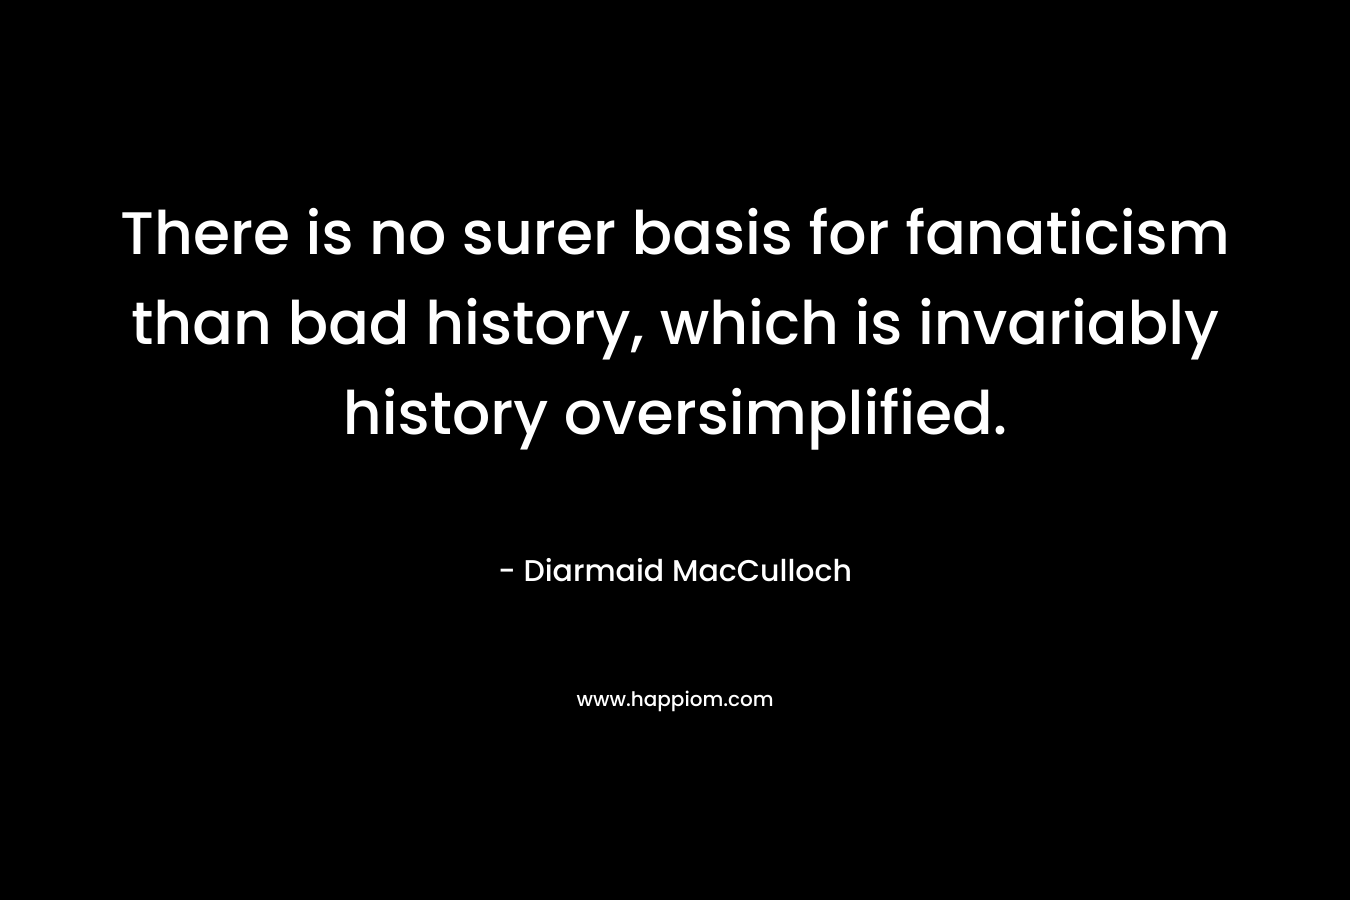 There is no surer basis for fanaticism than bad history, which is invariably history oversimplified. – Diarmaid MacCulloch